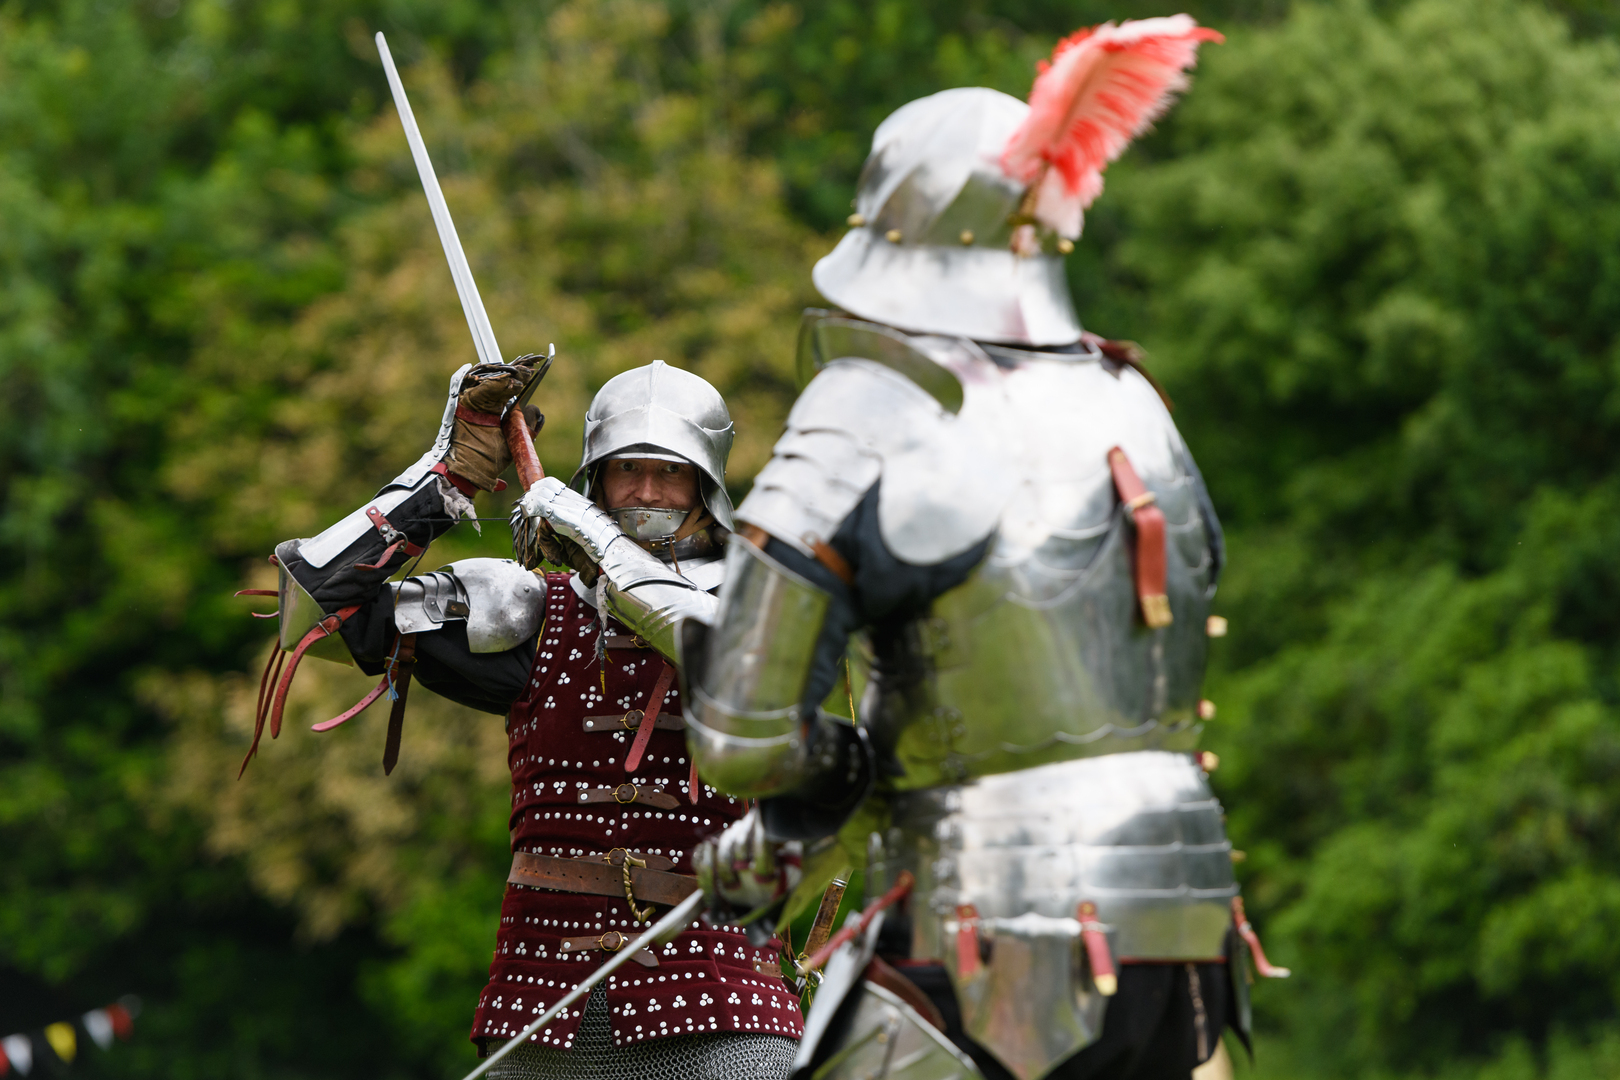 Arundel Castle to host Skirmish event for the end of May bank holiday weekend, Arundel, England, United Kingdom